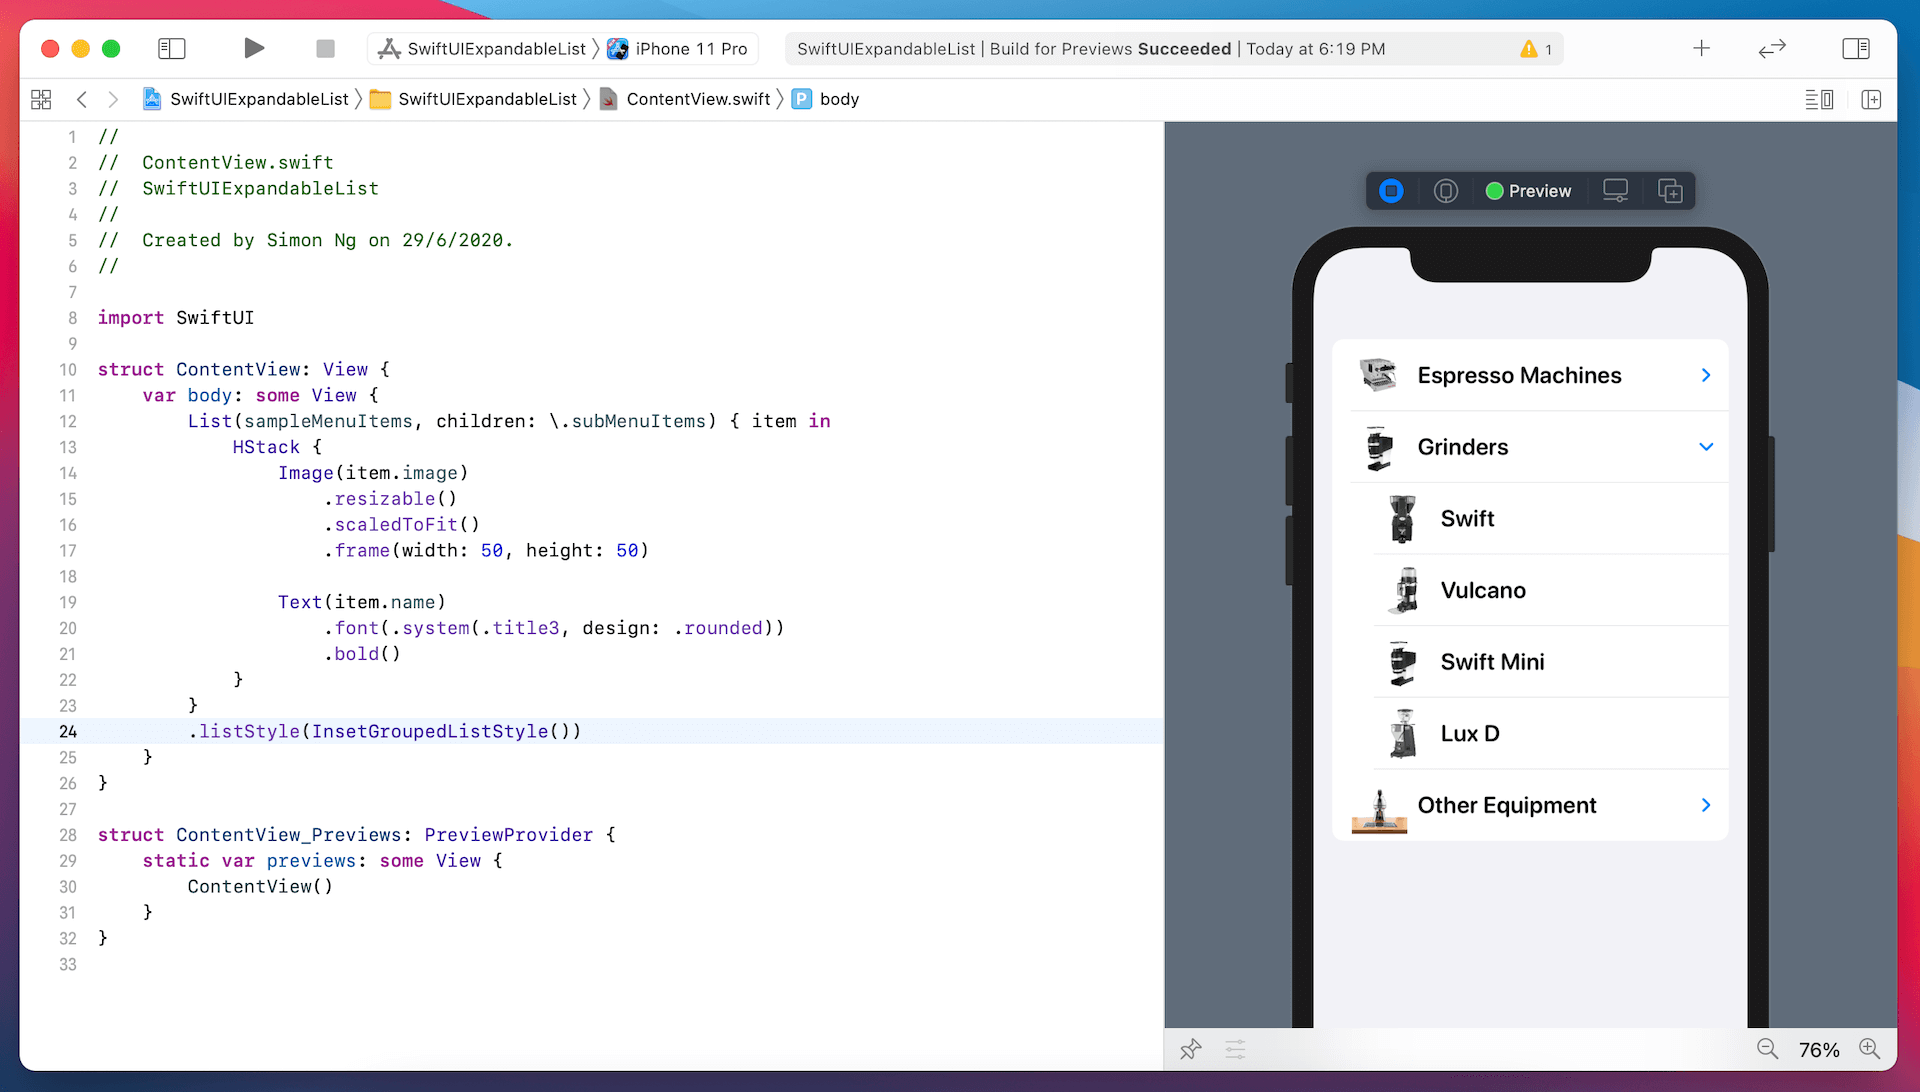 swiftui-inset-grouped-style-list